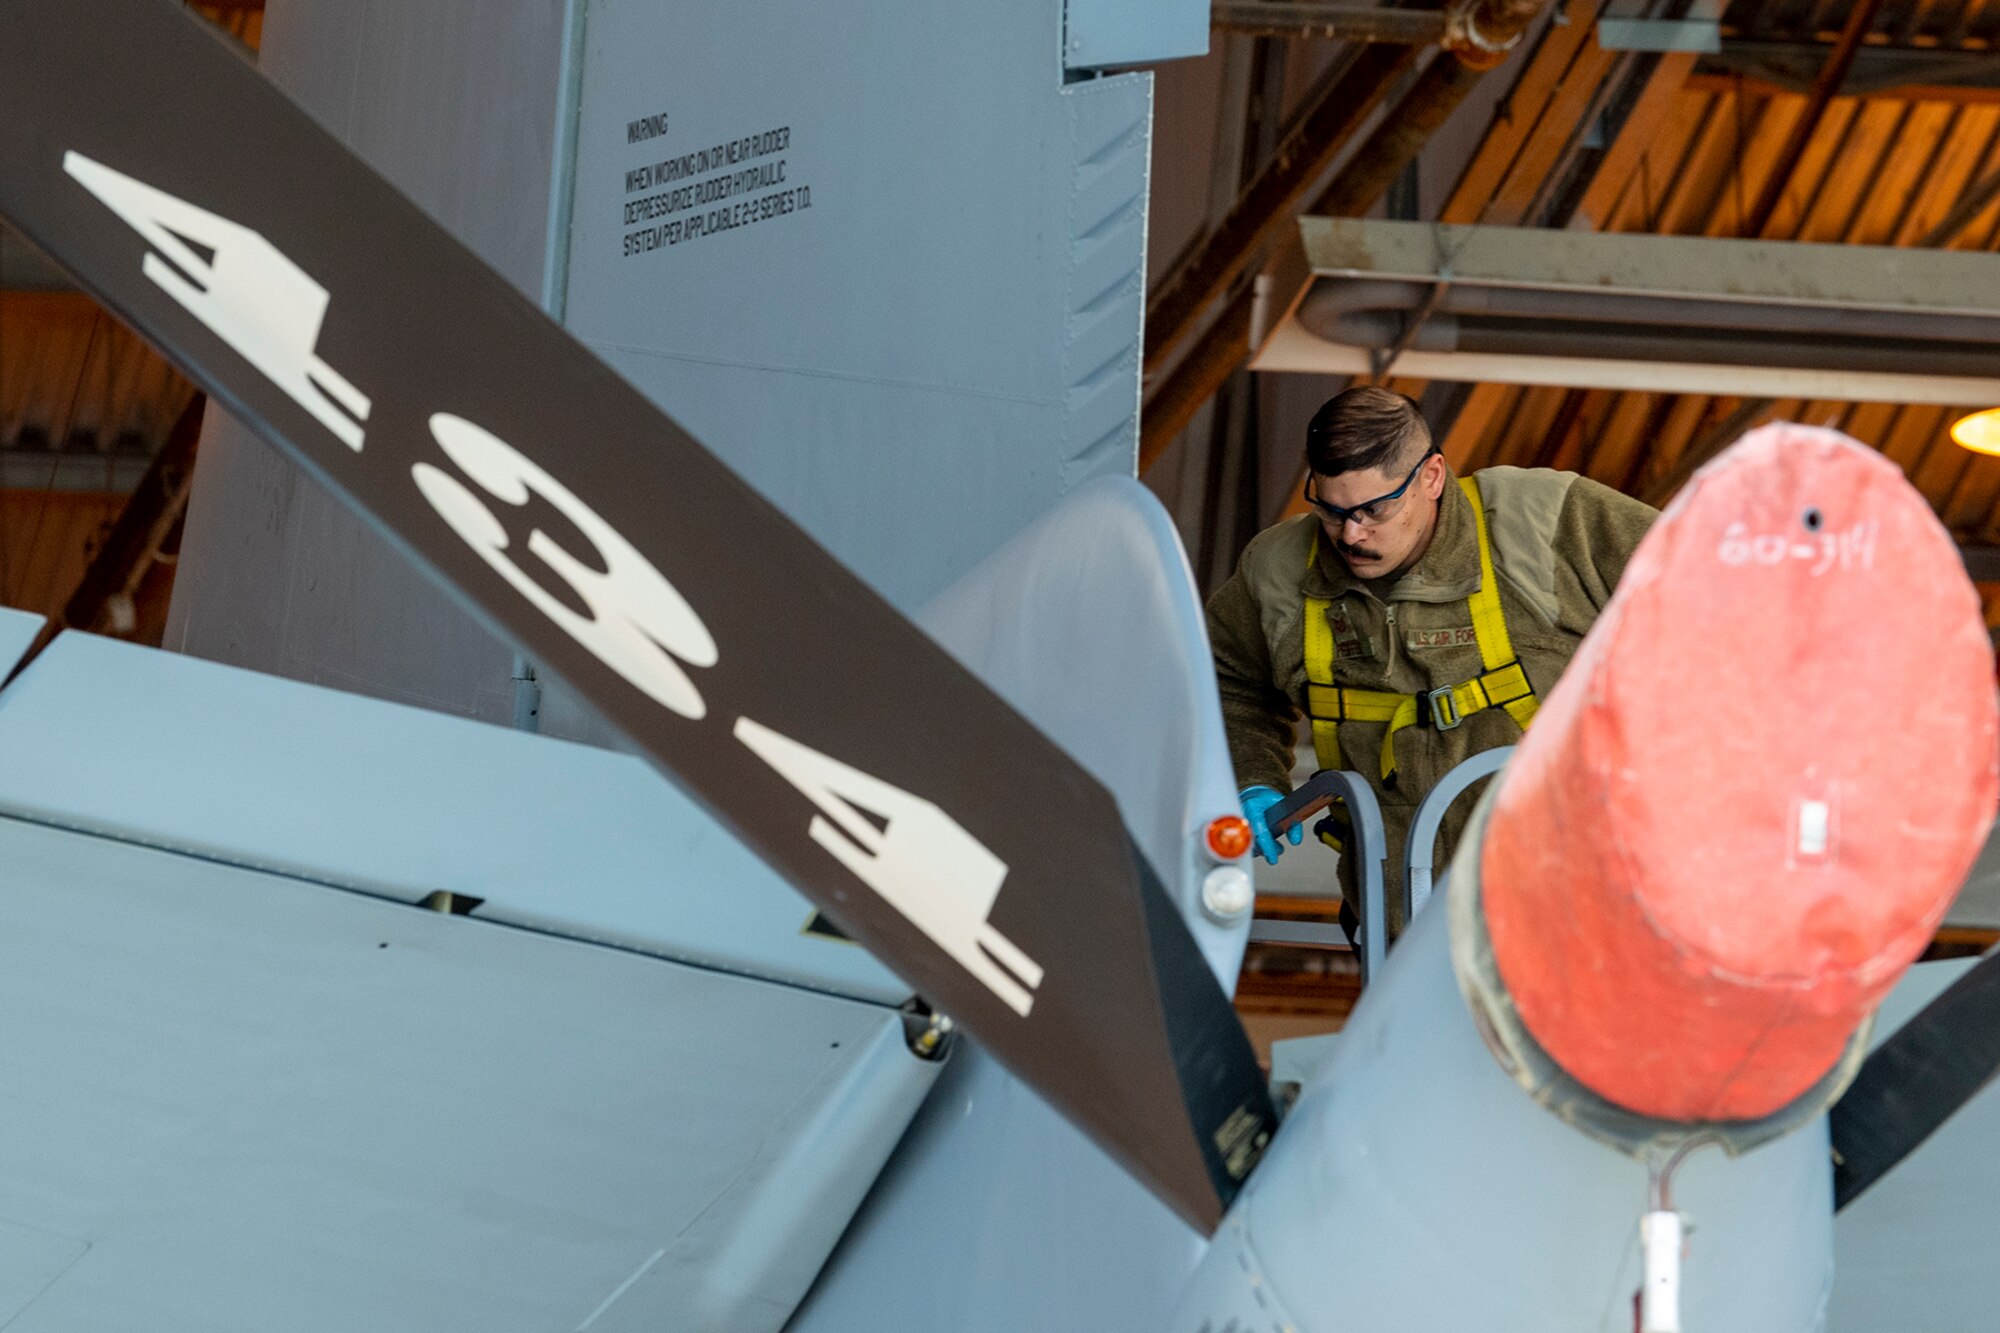 Tech. Sgt. Joel Pfeiffer, 434th Maintenance Squadron repair and reclamation technician, moves to remove a tail pin on aircraft 60-0314 on March 16, 2023. The pin replacement was mandated by a time compliant technical order issued recently that grounded KC-135R Stratotankers that didn’t meet required specifications. (U.S. Air Force photo by Douglas Hays)